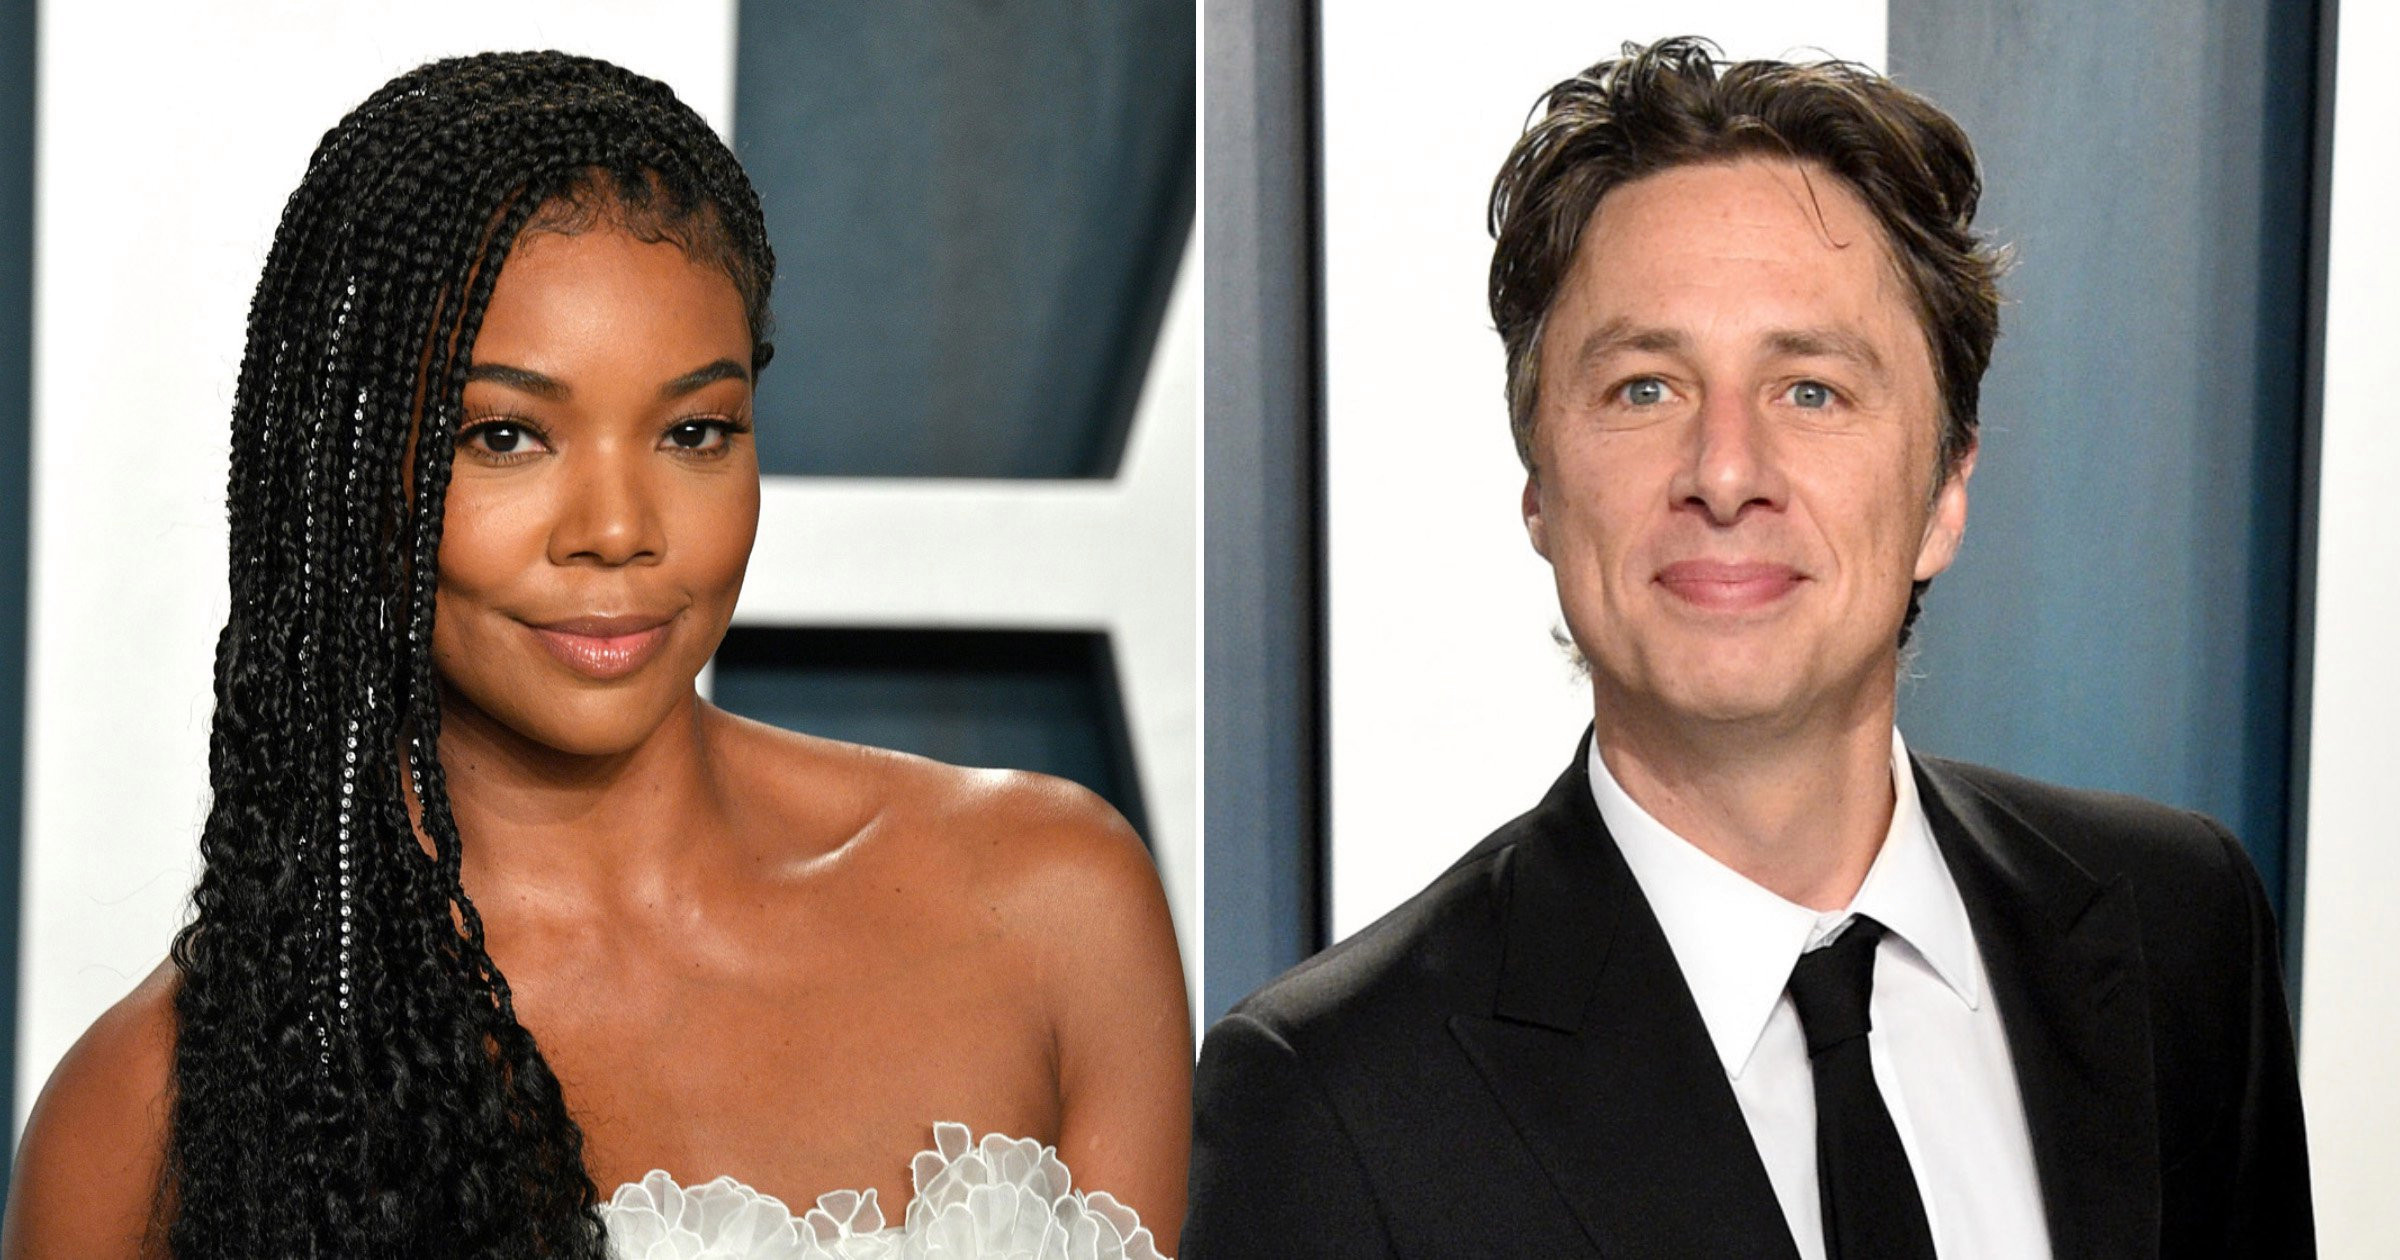 Zach Braff and Gabrielle Union to star in Cheaper By The Dozen reboot from Black-ish creator